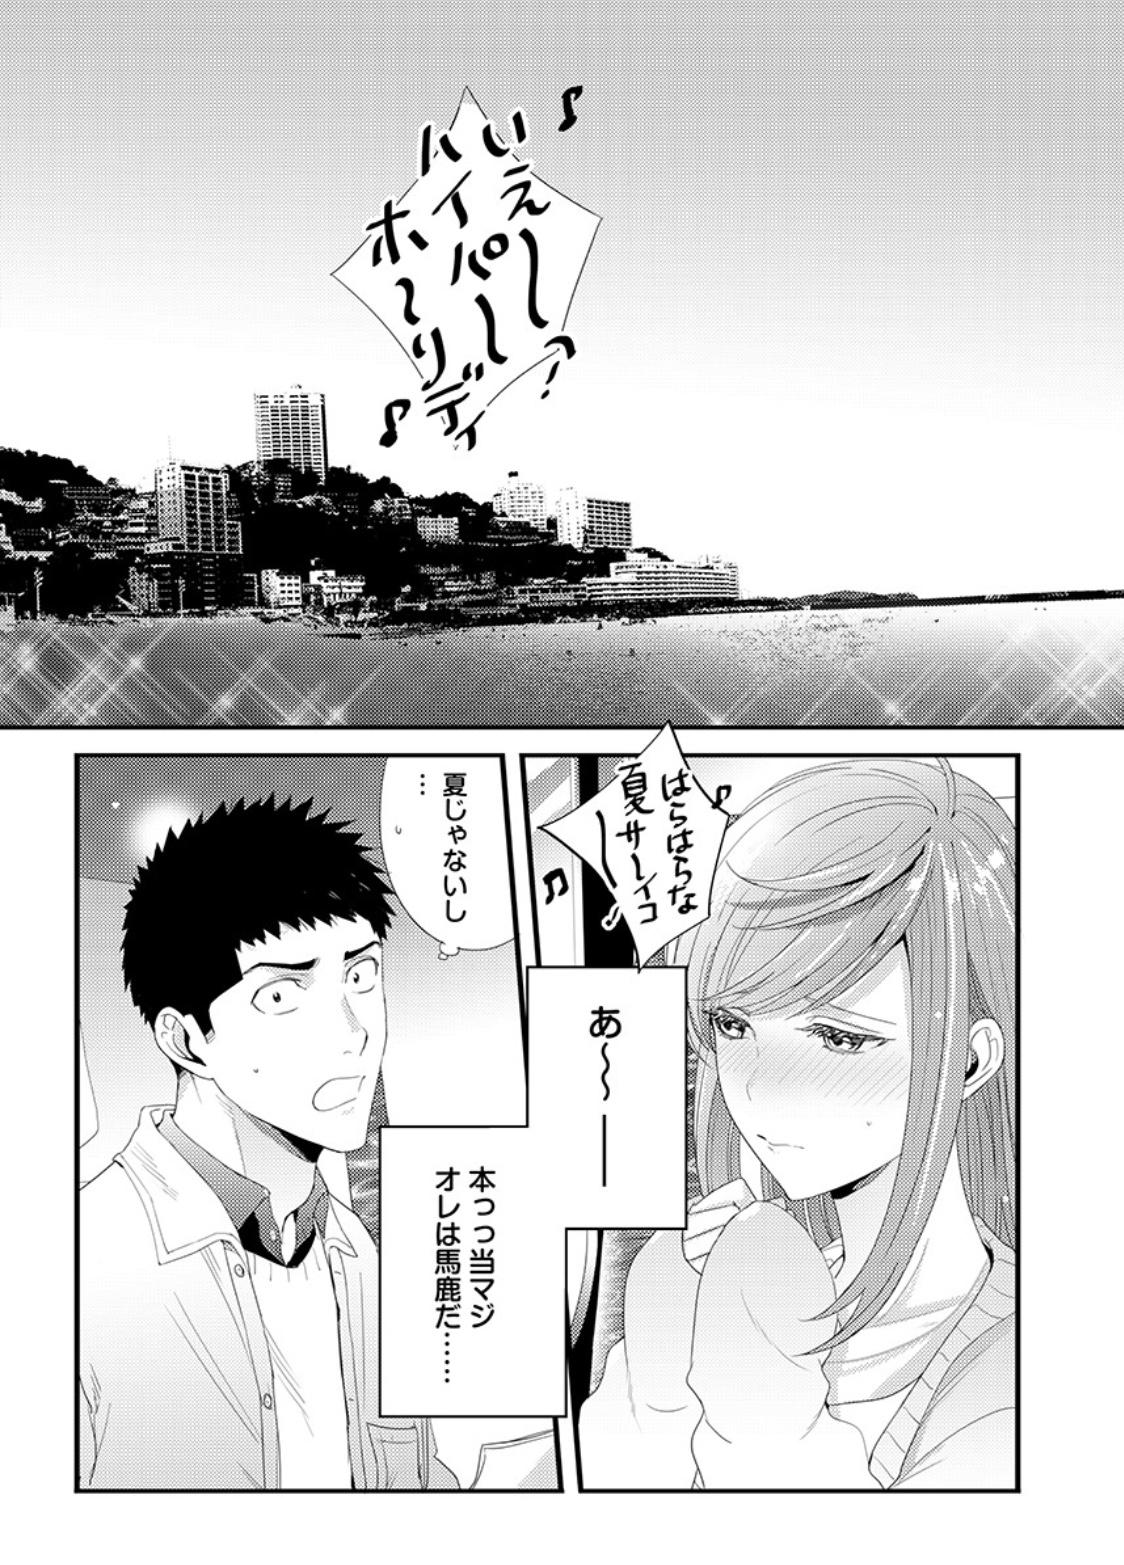 Please Let Me Hold You Futaba-San! Ch. 1+2 28